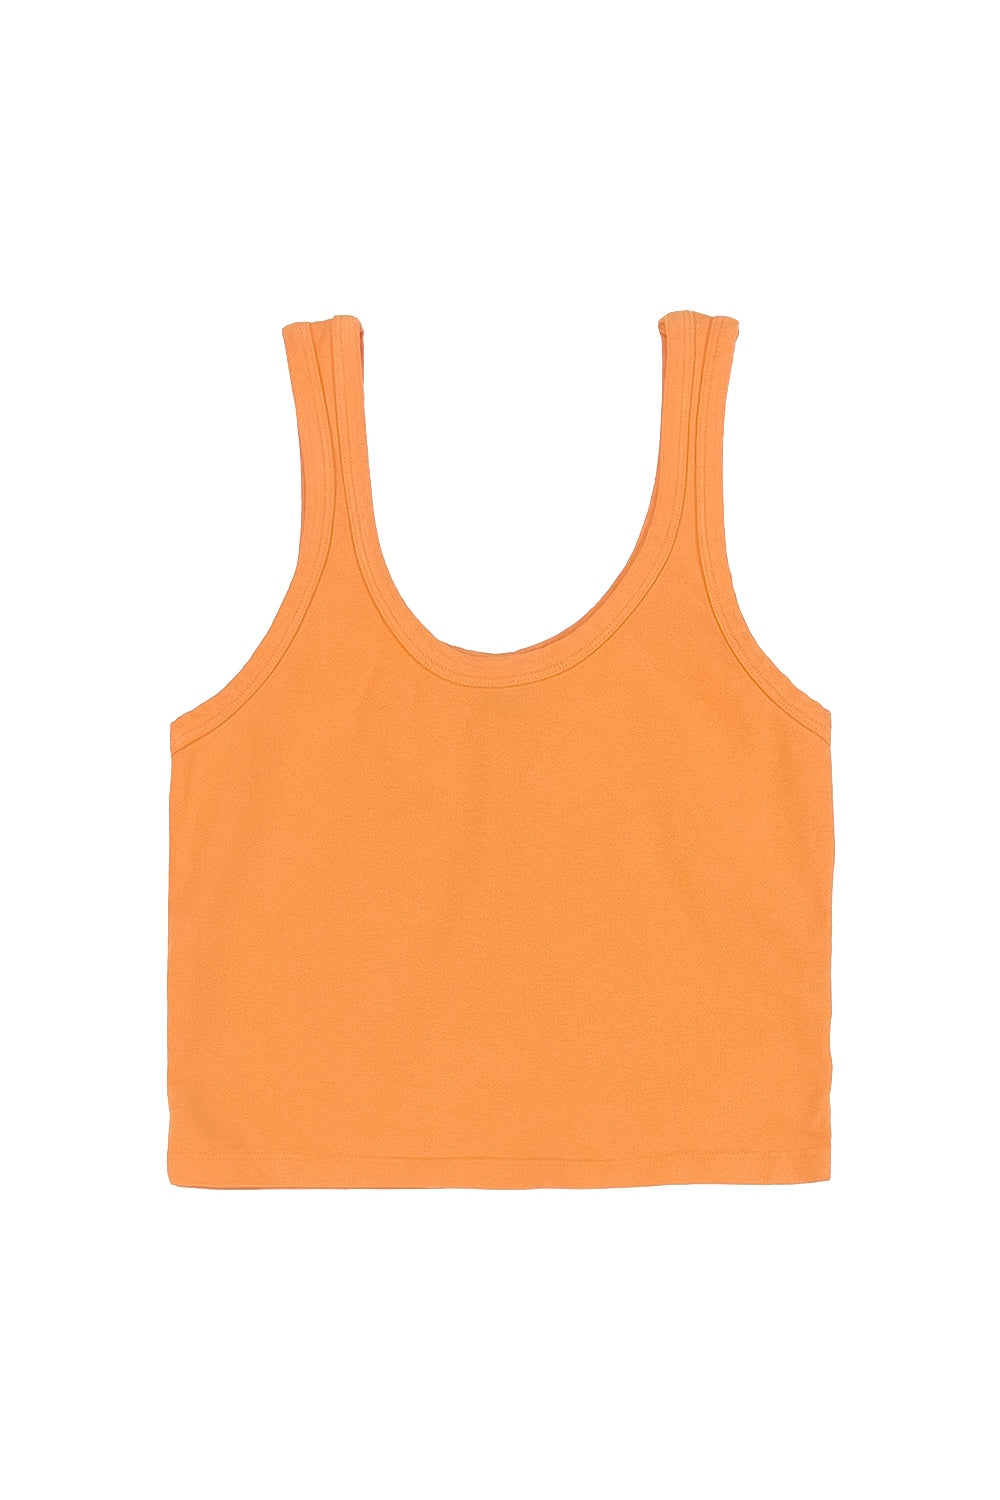  Burnt Orange Womens Athletic Tank Top Gym Shirts for